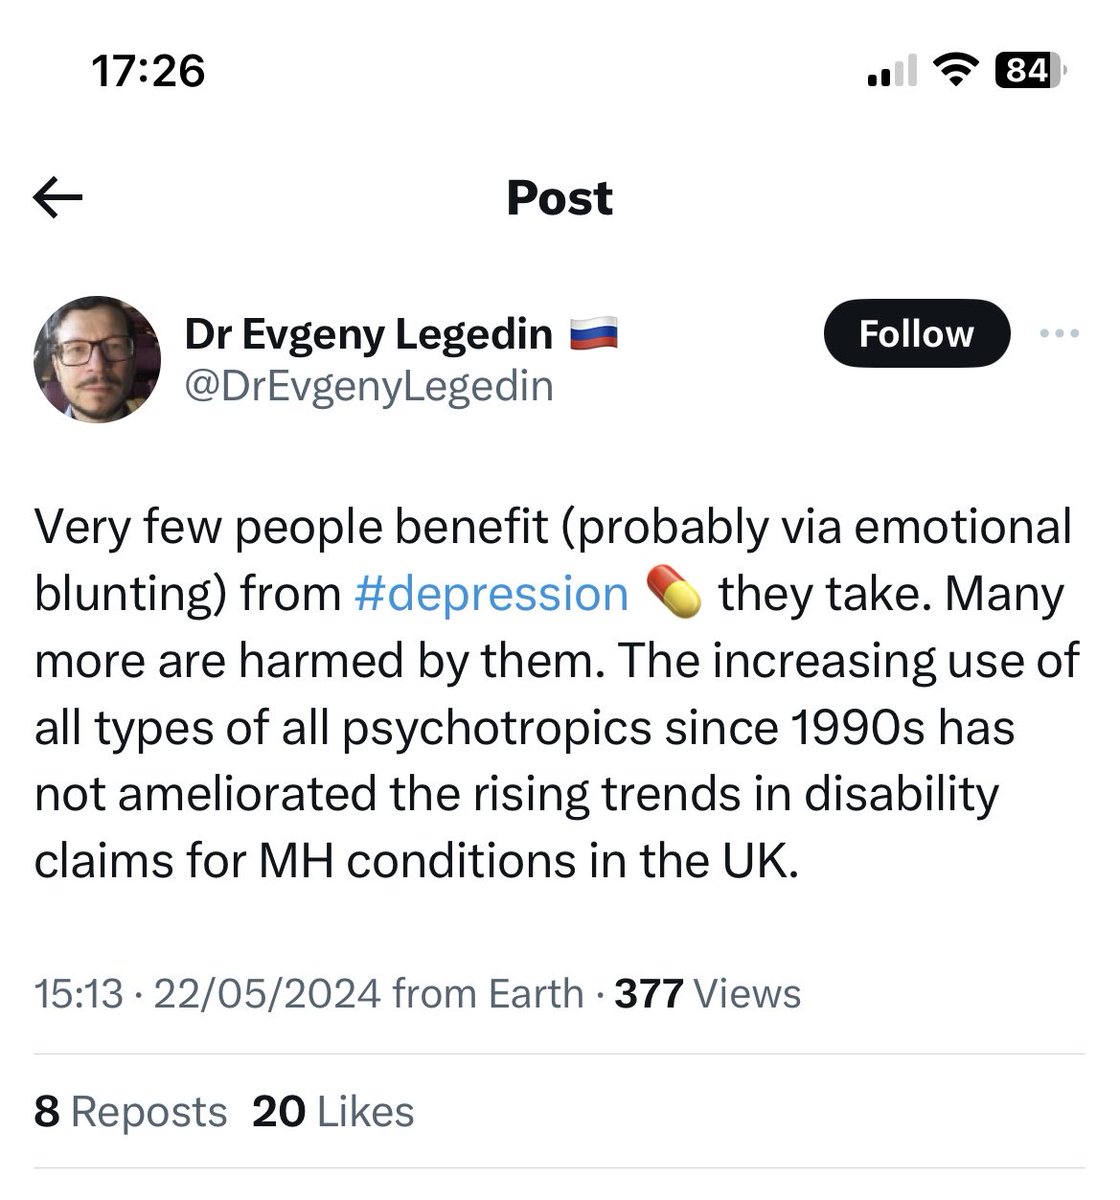 Breaking my own rule never to comment on this person’s tweets ever again, but I can personally say that antidepressants saved my life and without emotional blunting. End